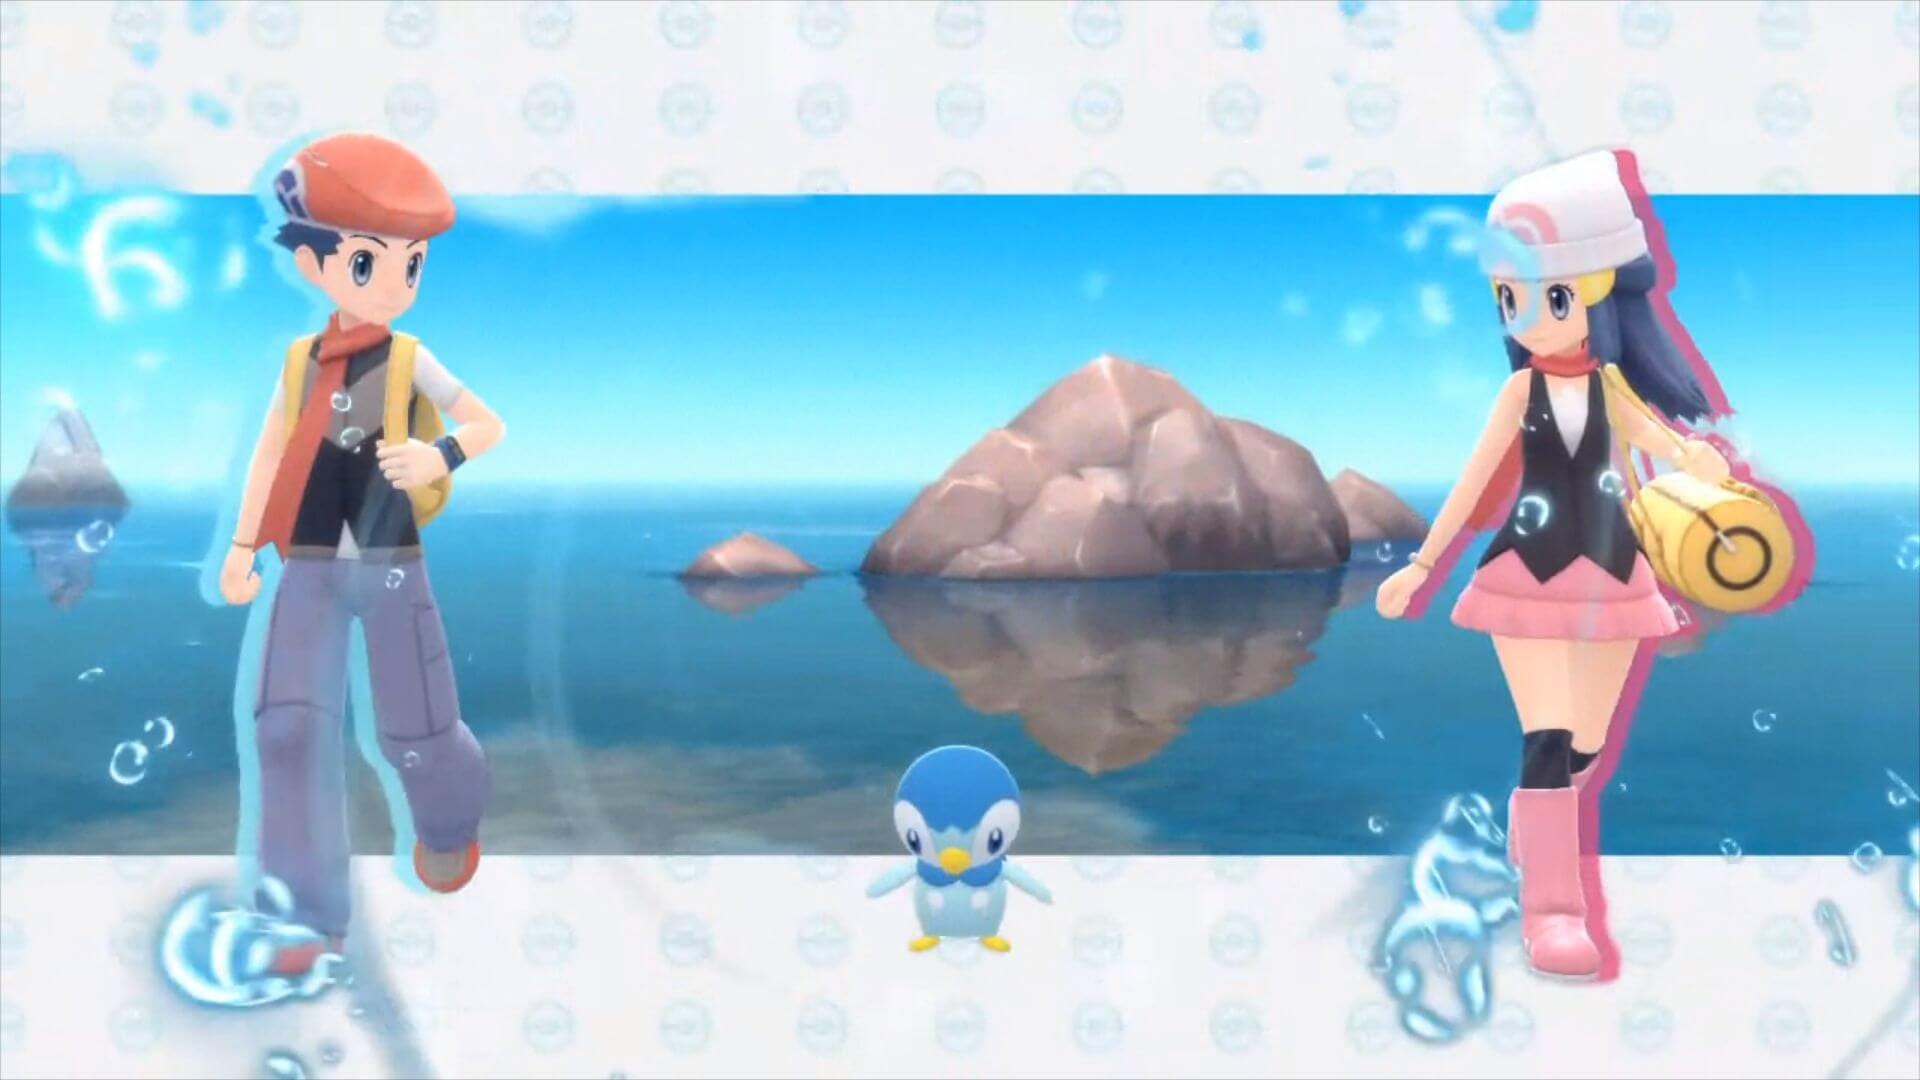 Pokémon Brilliant Diamond and Shining Pearl: Differences from the